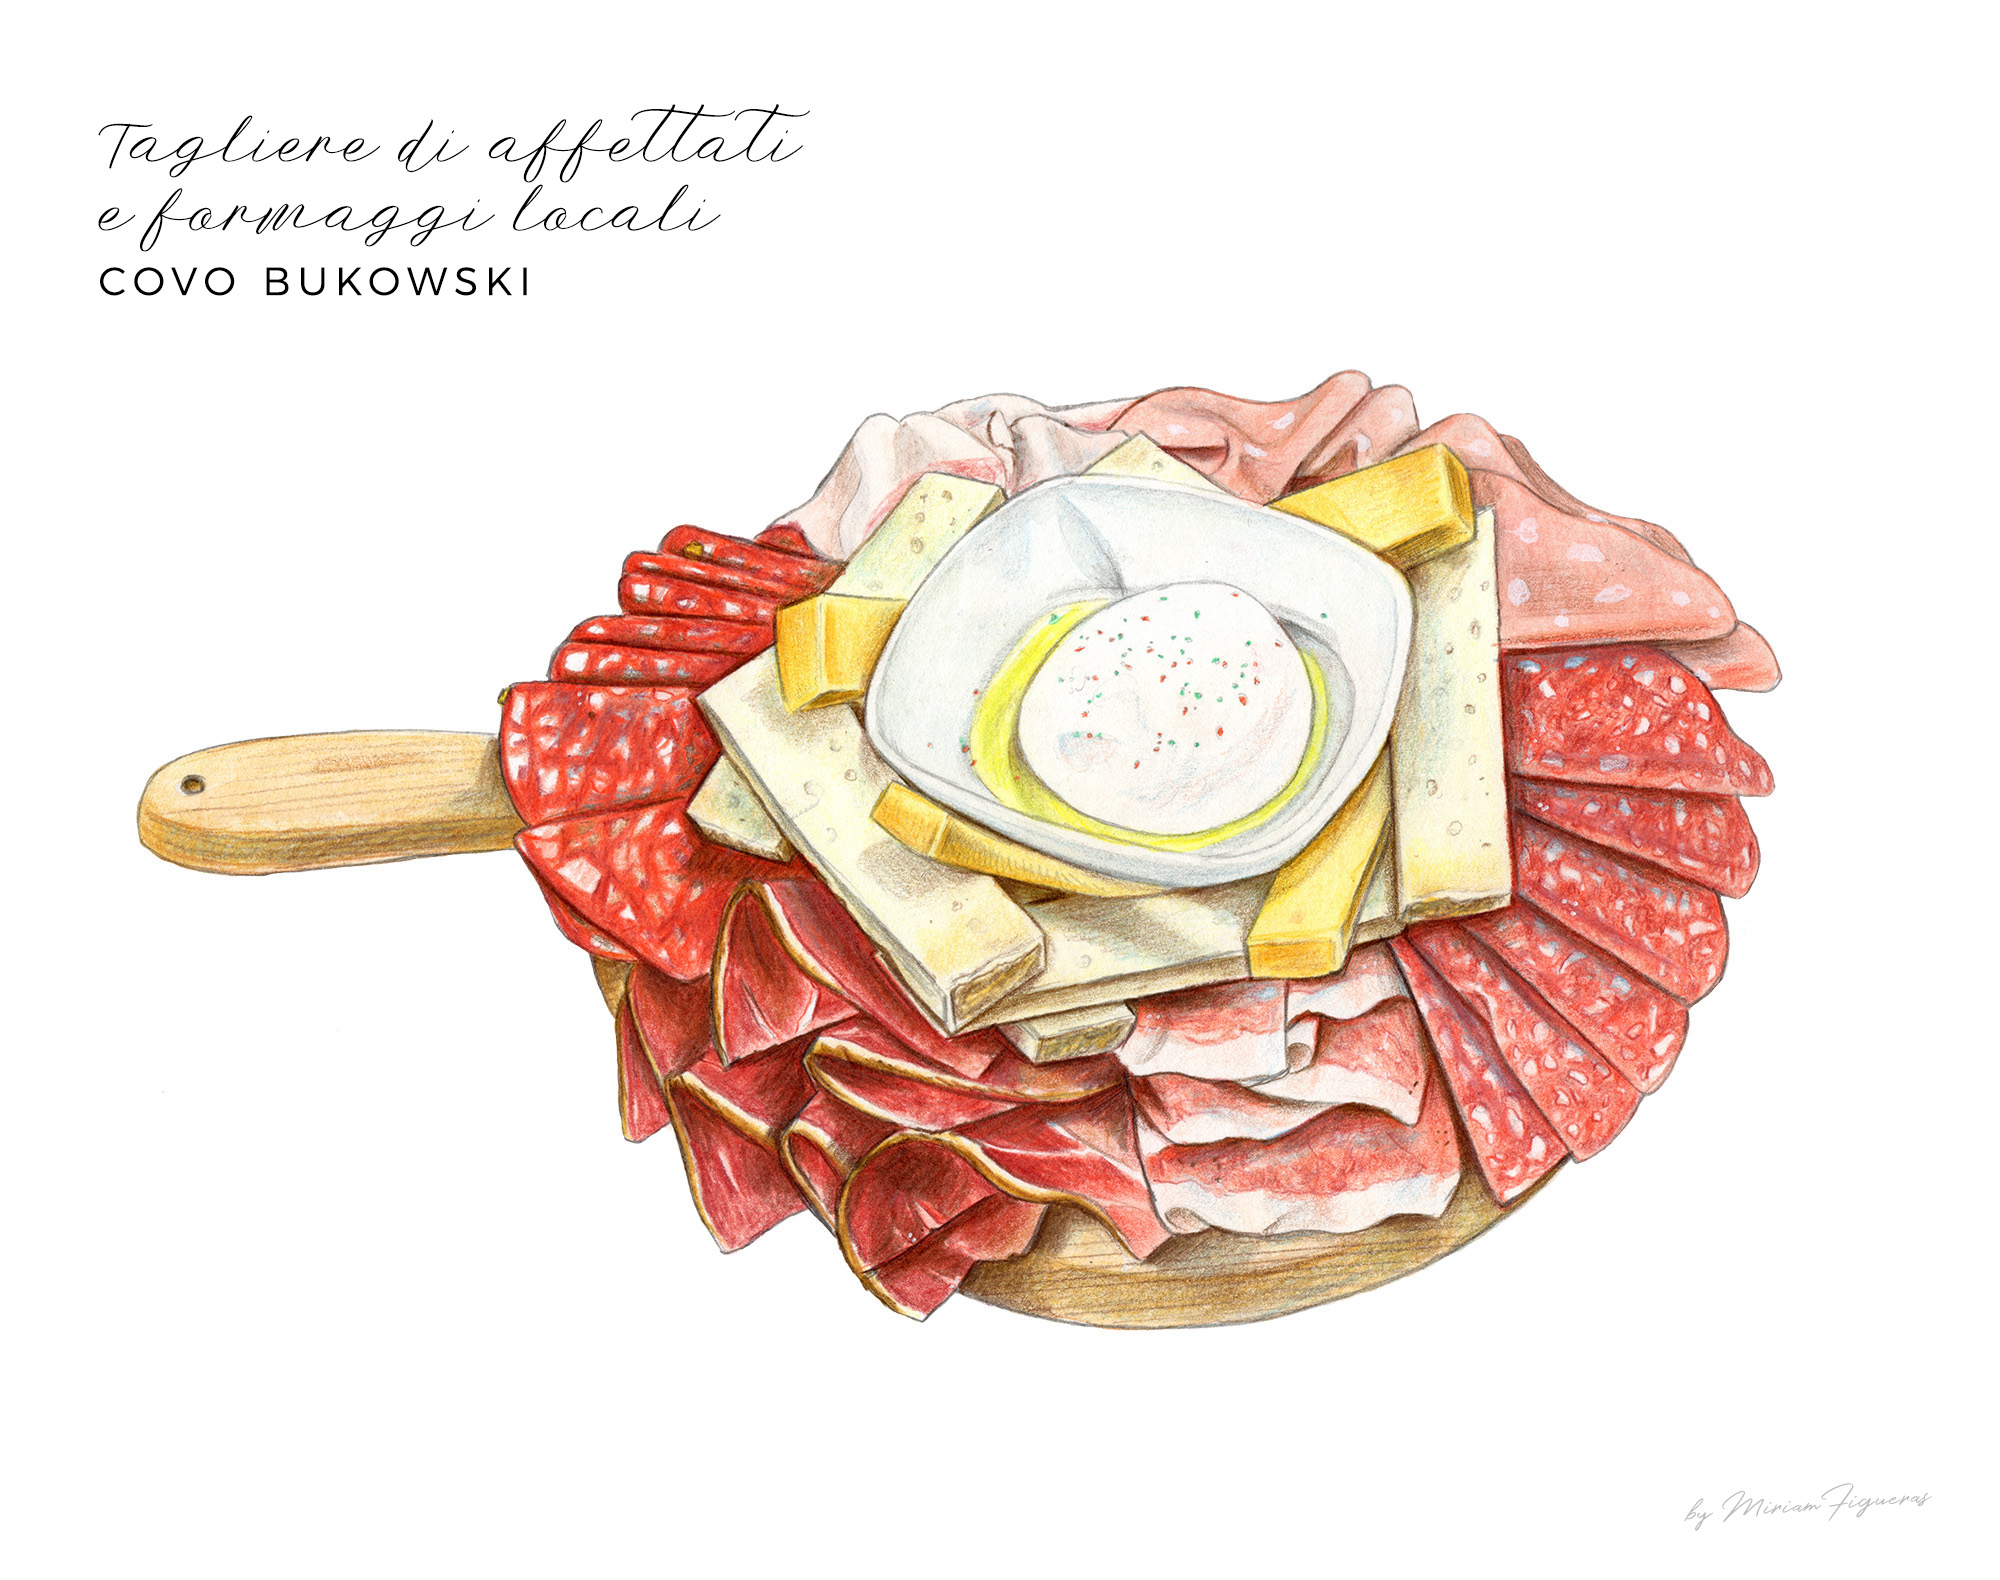 Part of a series of illustrations depicting the sweet culinary wonders of Pistoia, Italy. Food illustration with emphasis on realism, color vibrance and texture. Mixed media technique involving watercolors, colored pencils, soft pastels and graphite by Miriam Figueras.